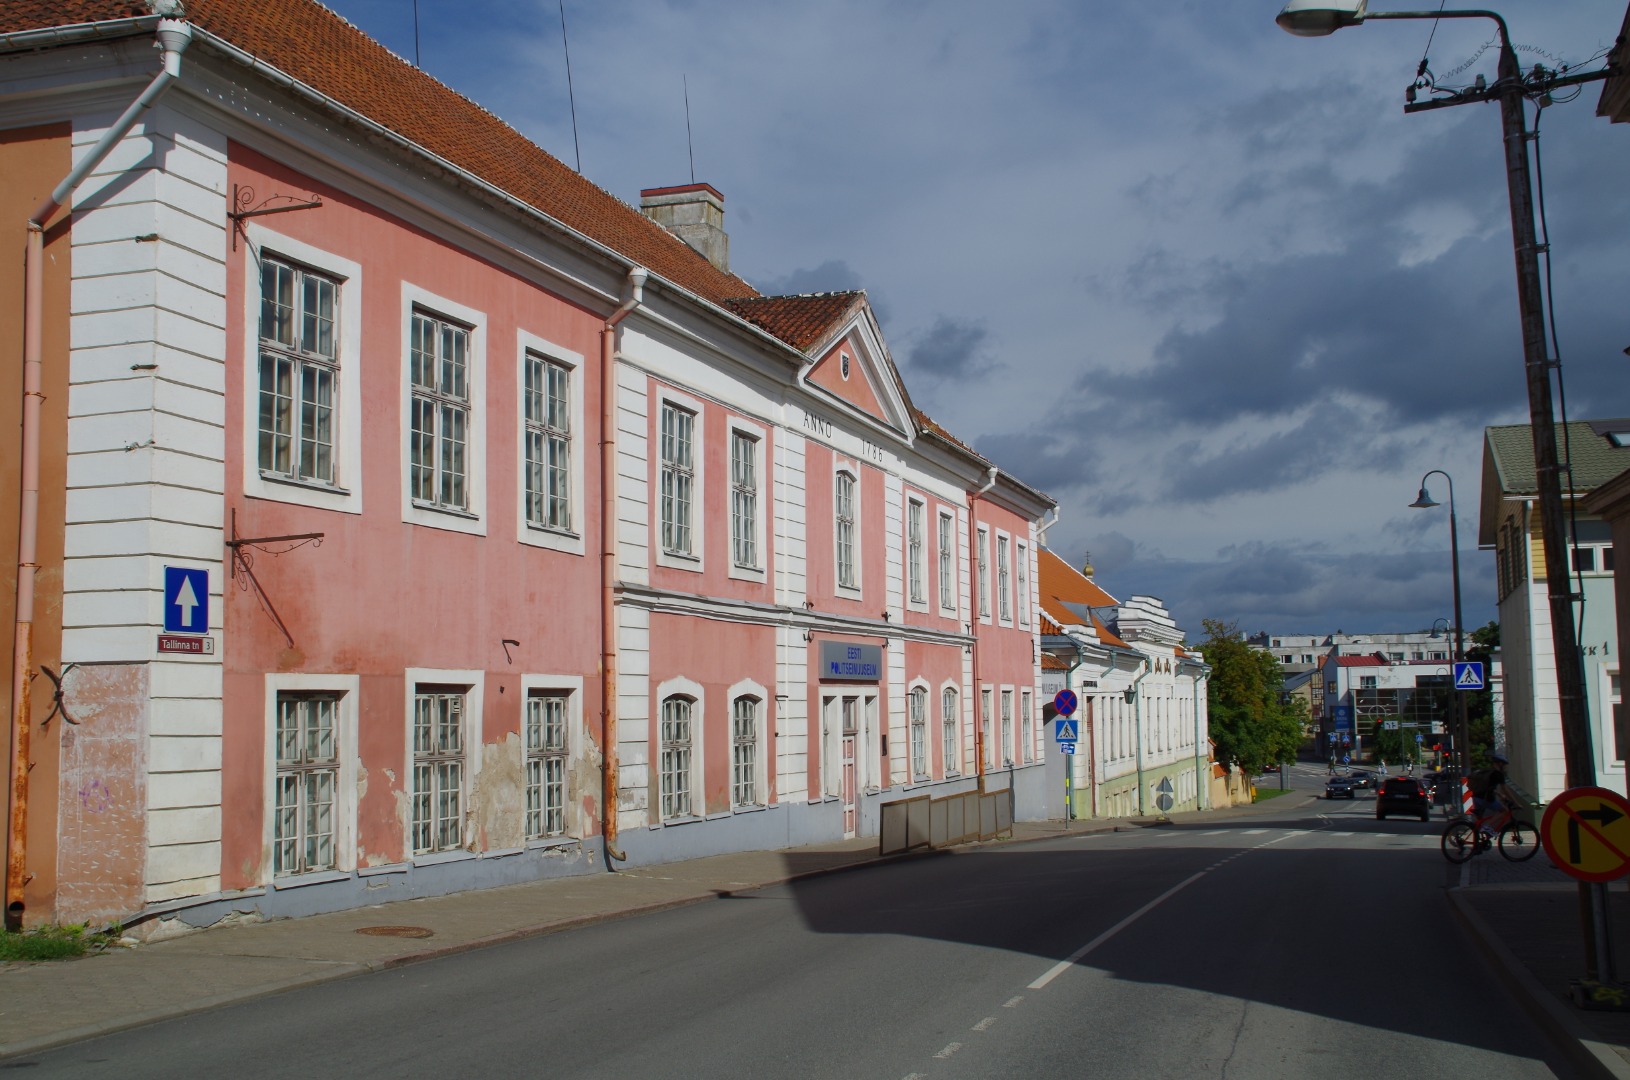 External view of the Rakvere Home Museum. rephoto